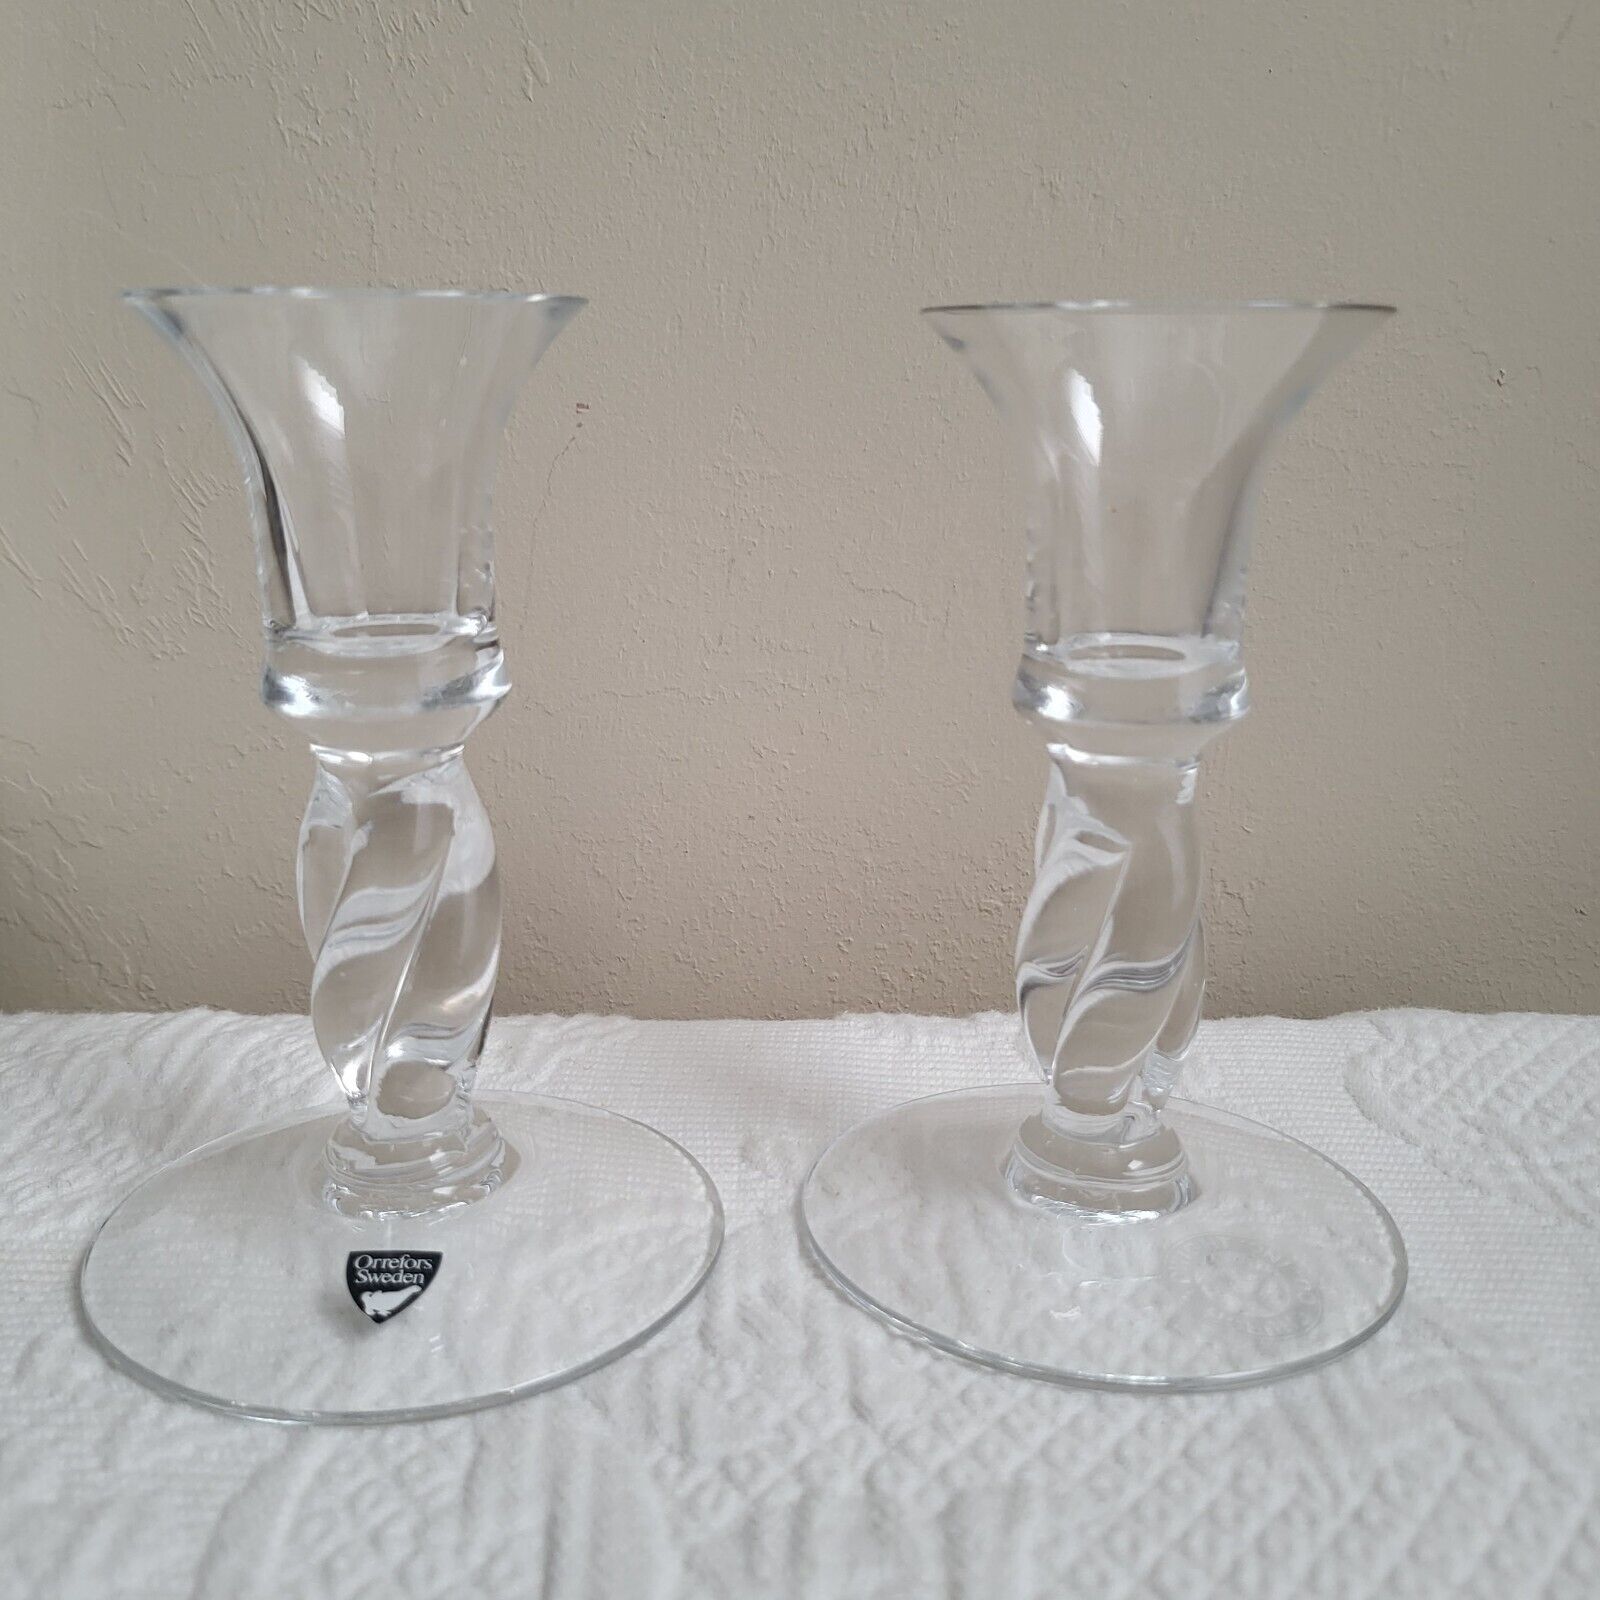 Set of 2 Orrefors Sweden Glass Collectable Church &Dwight Co. Candlesticks